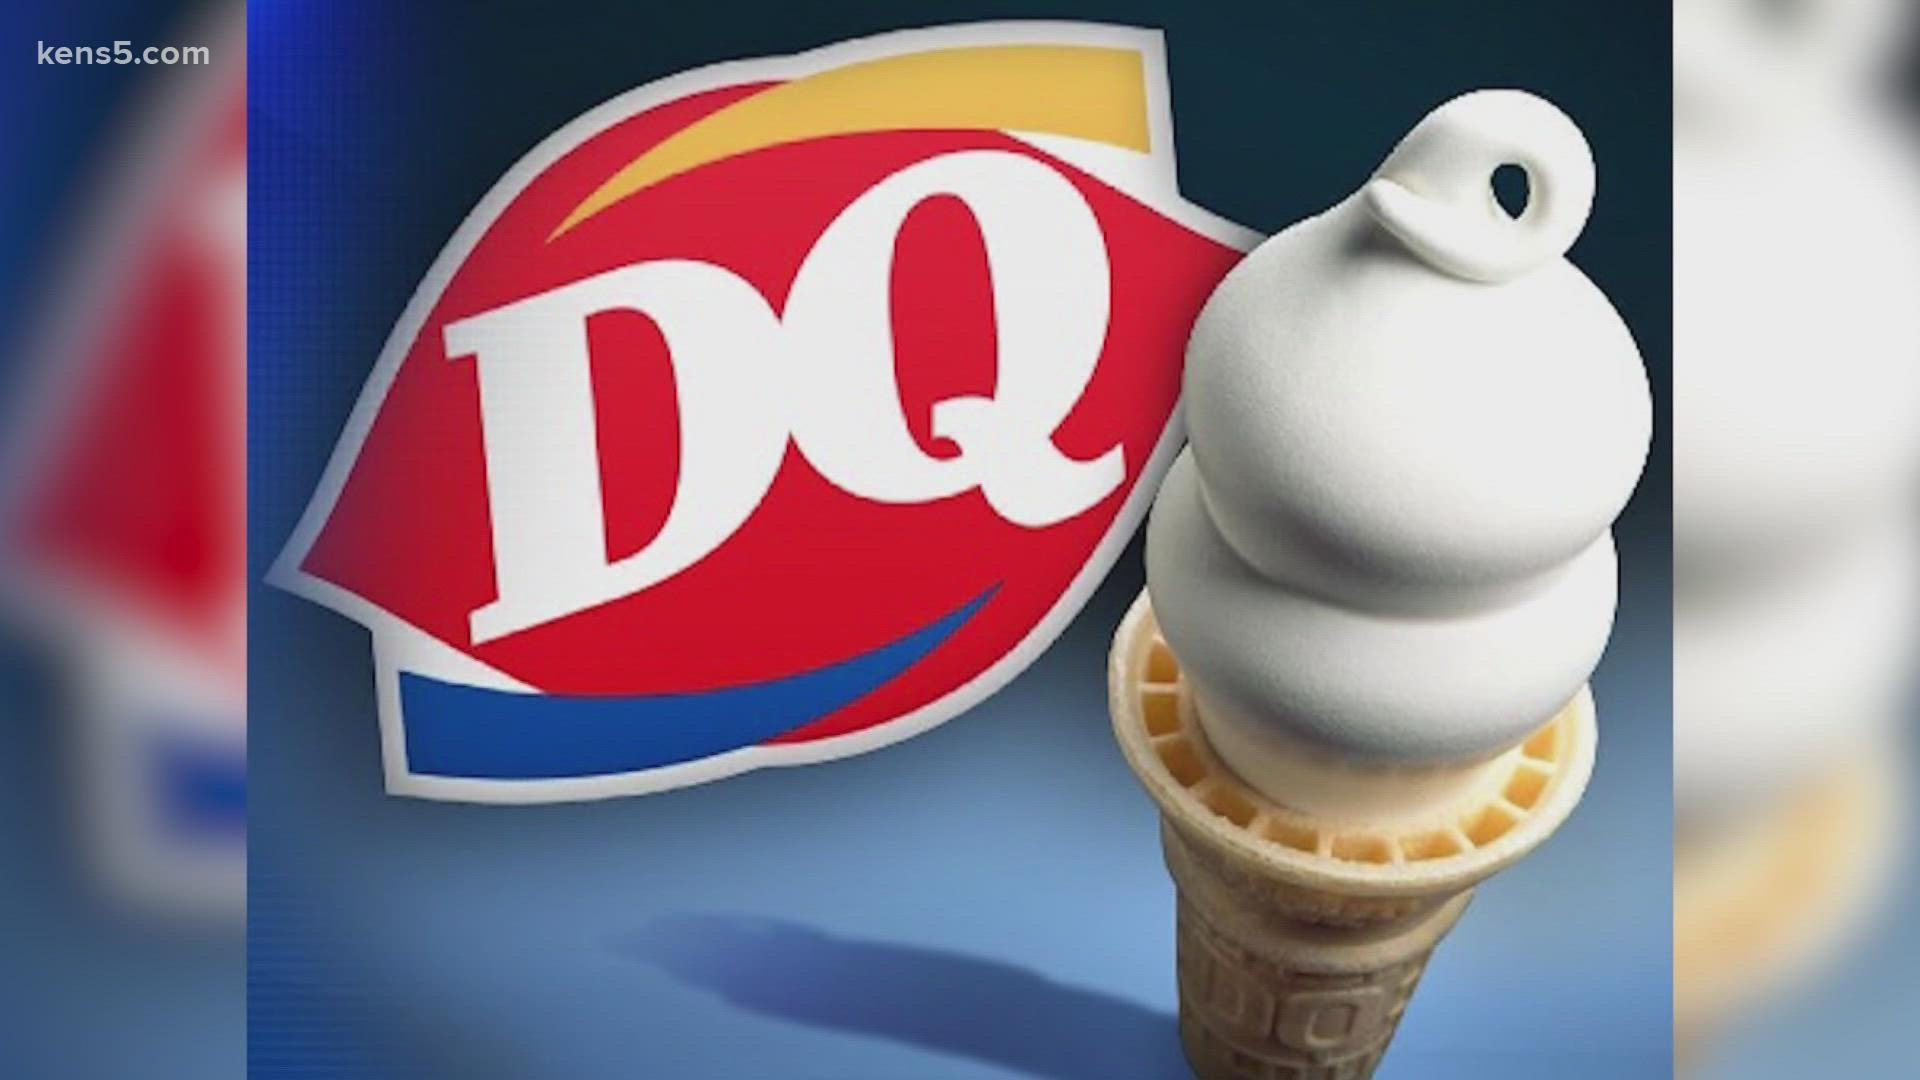 The restaurant chain announced that they are "turning back the clock" to when people could get a chocolate-dipped cone with vanilla soft serve for less than a buck.